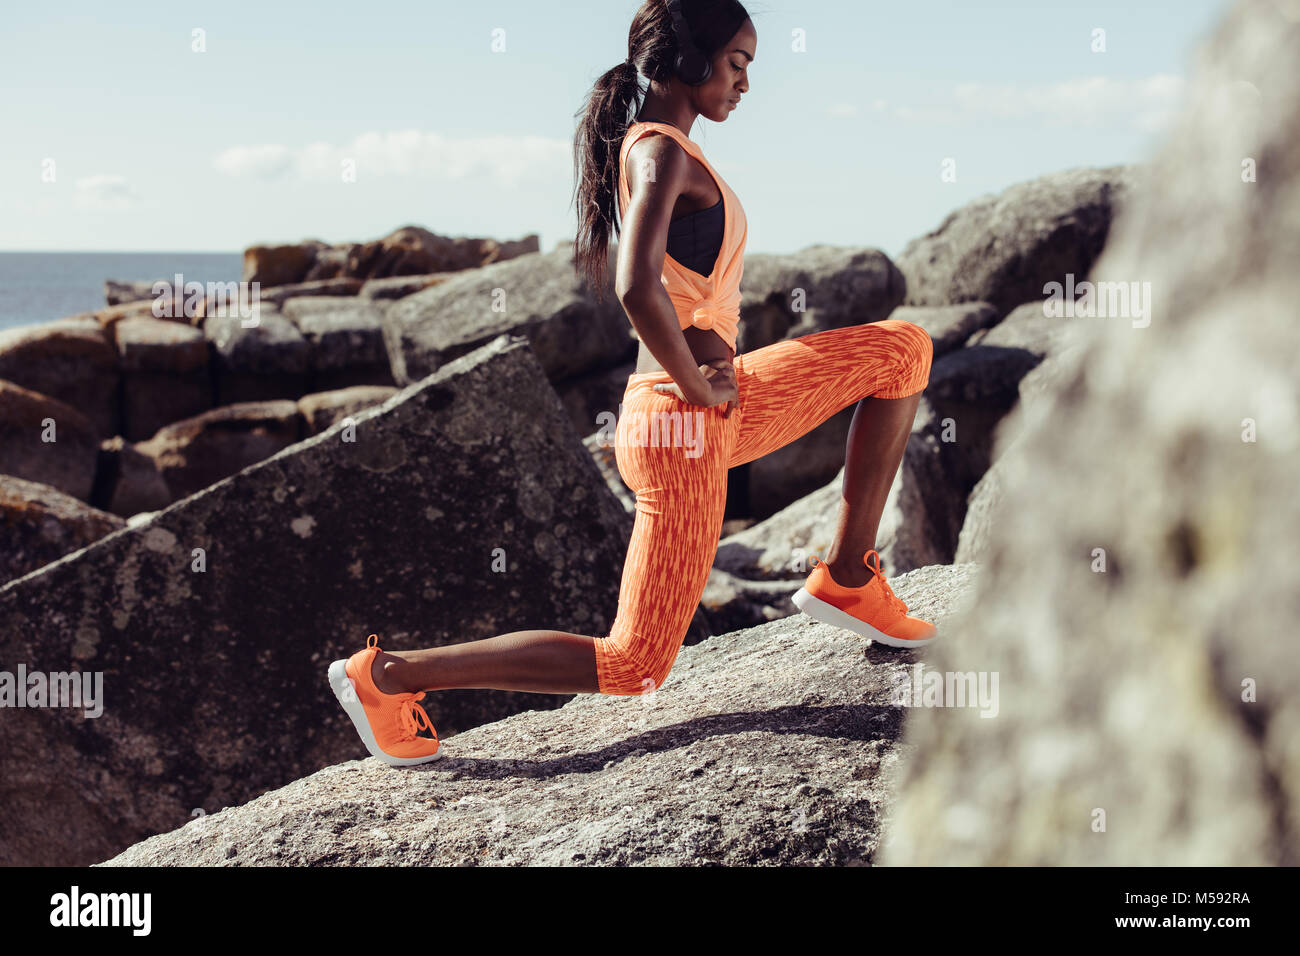 Woman doing warming up exercises on the rocks at the beach. Female athlete stretching her body. Stock Photo